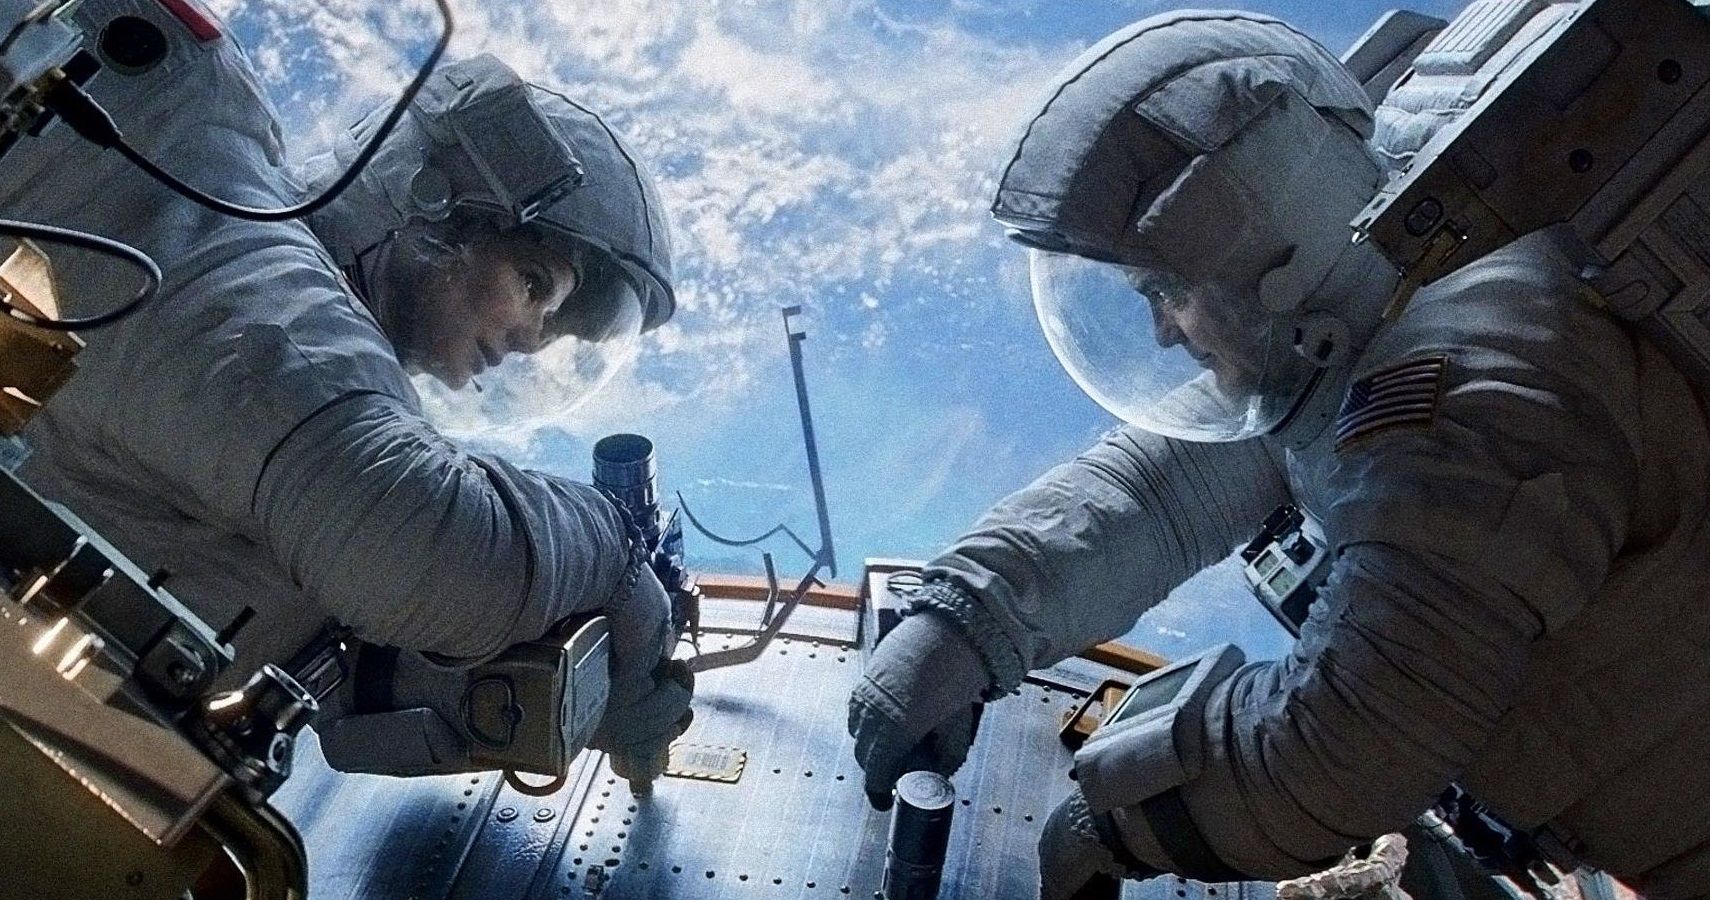 Don't Let Go: 10 Behind-The-Scenes Facts About Gravity